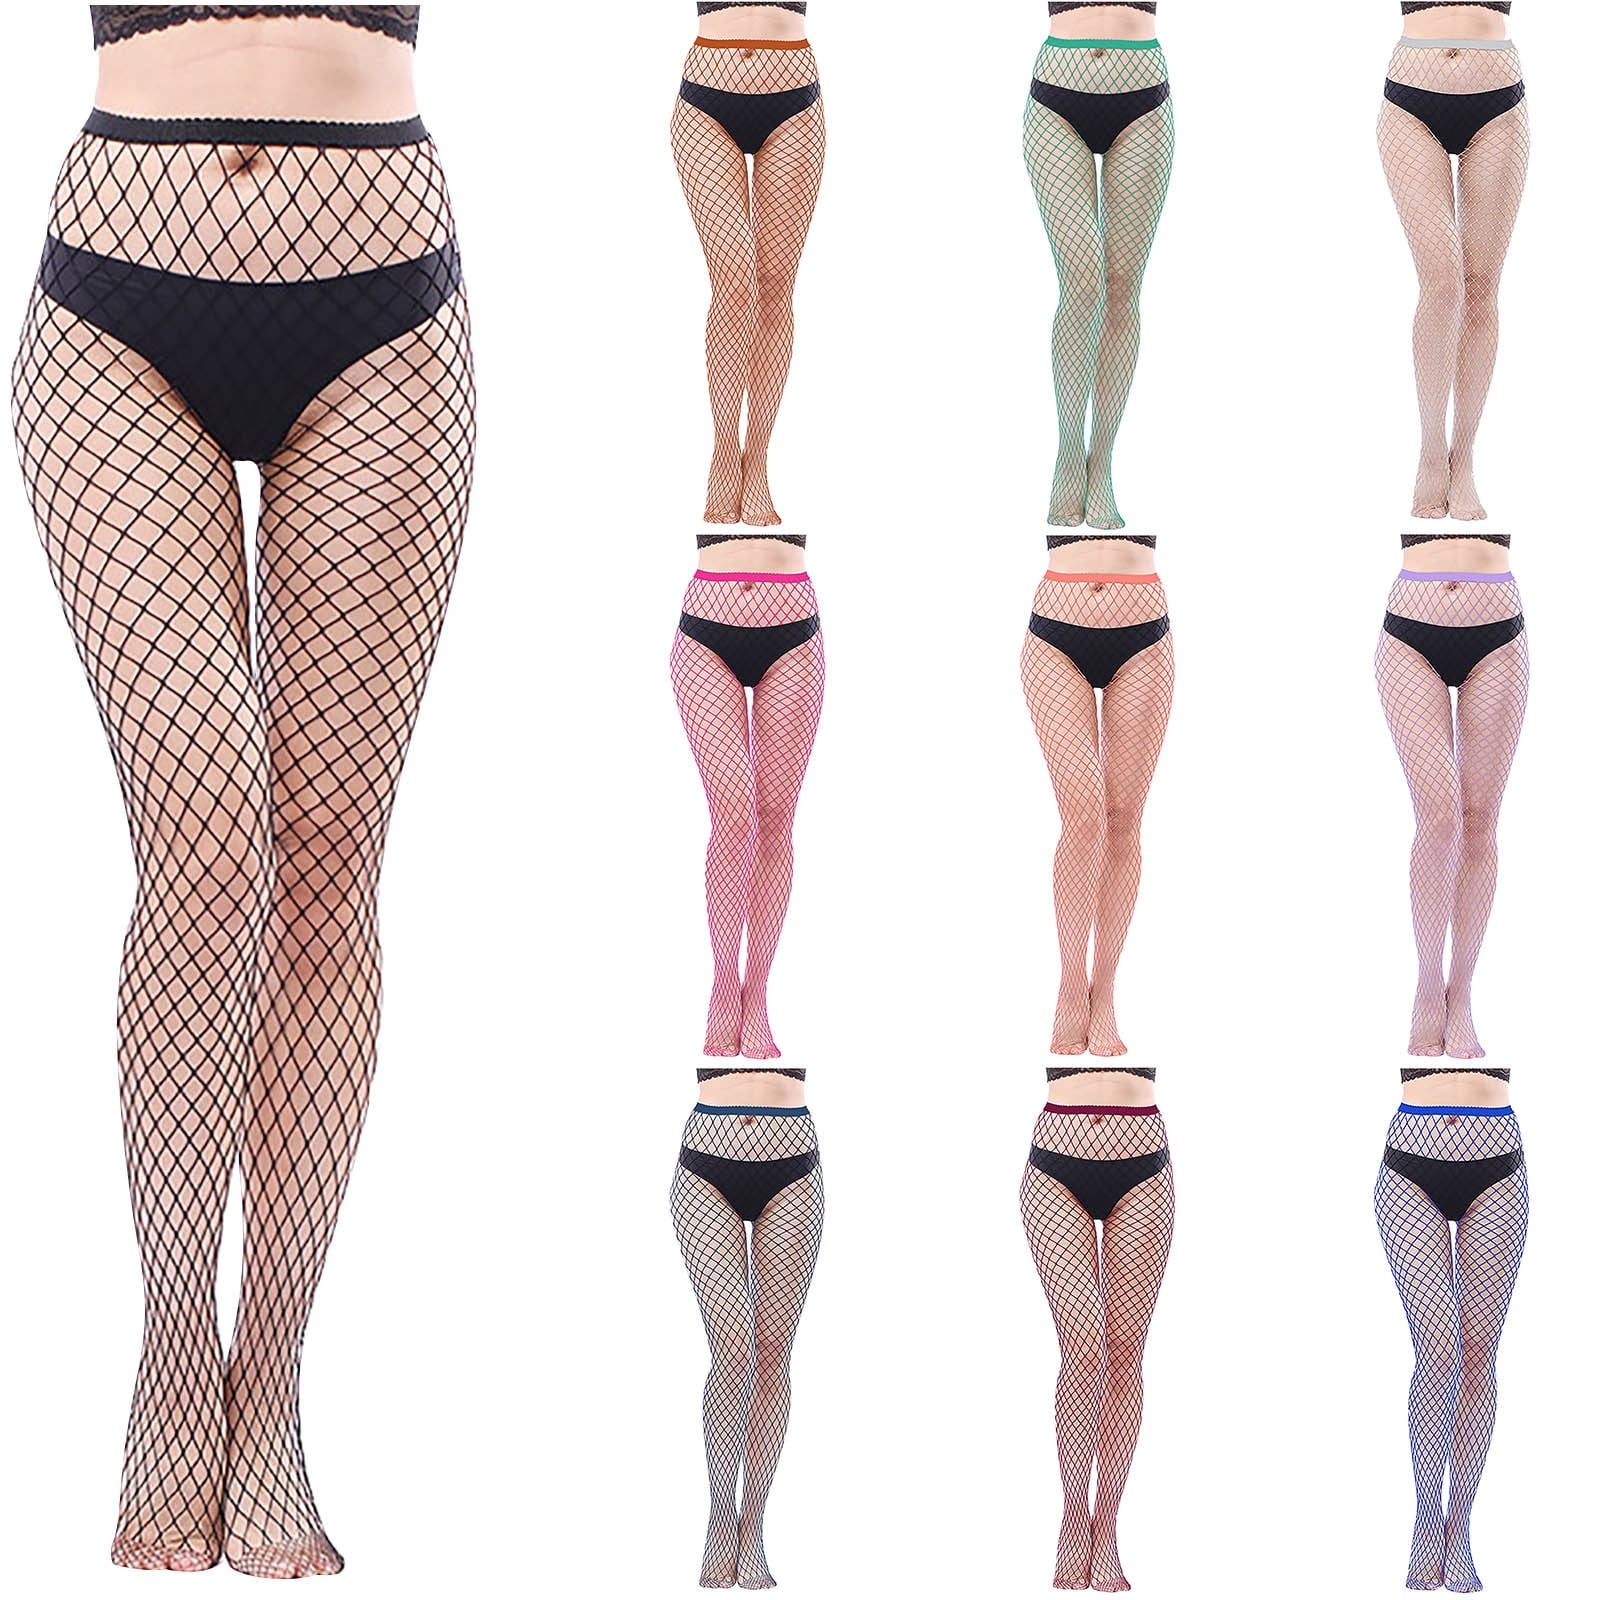 Fishnet Tights for Women Super Elastic Fishnet Stockings Thigh High  Stockings High Waist Stockings Pantyhose Super Flexible Indestructible  Magical